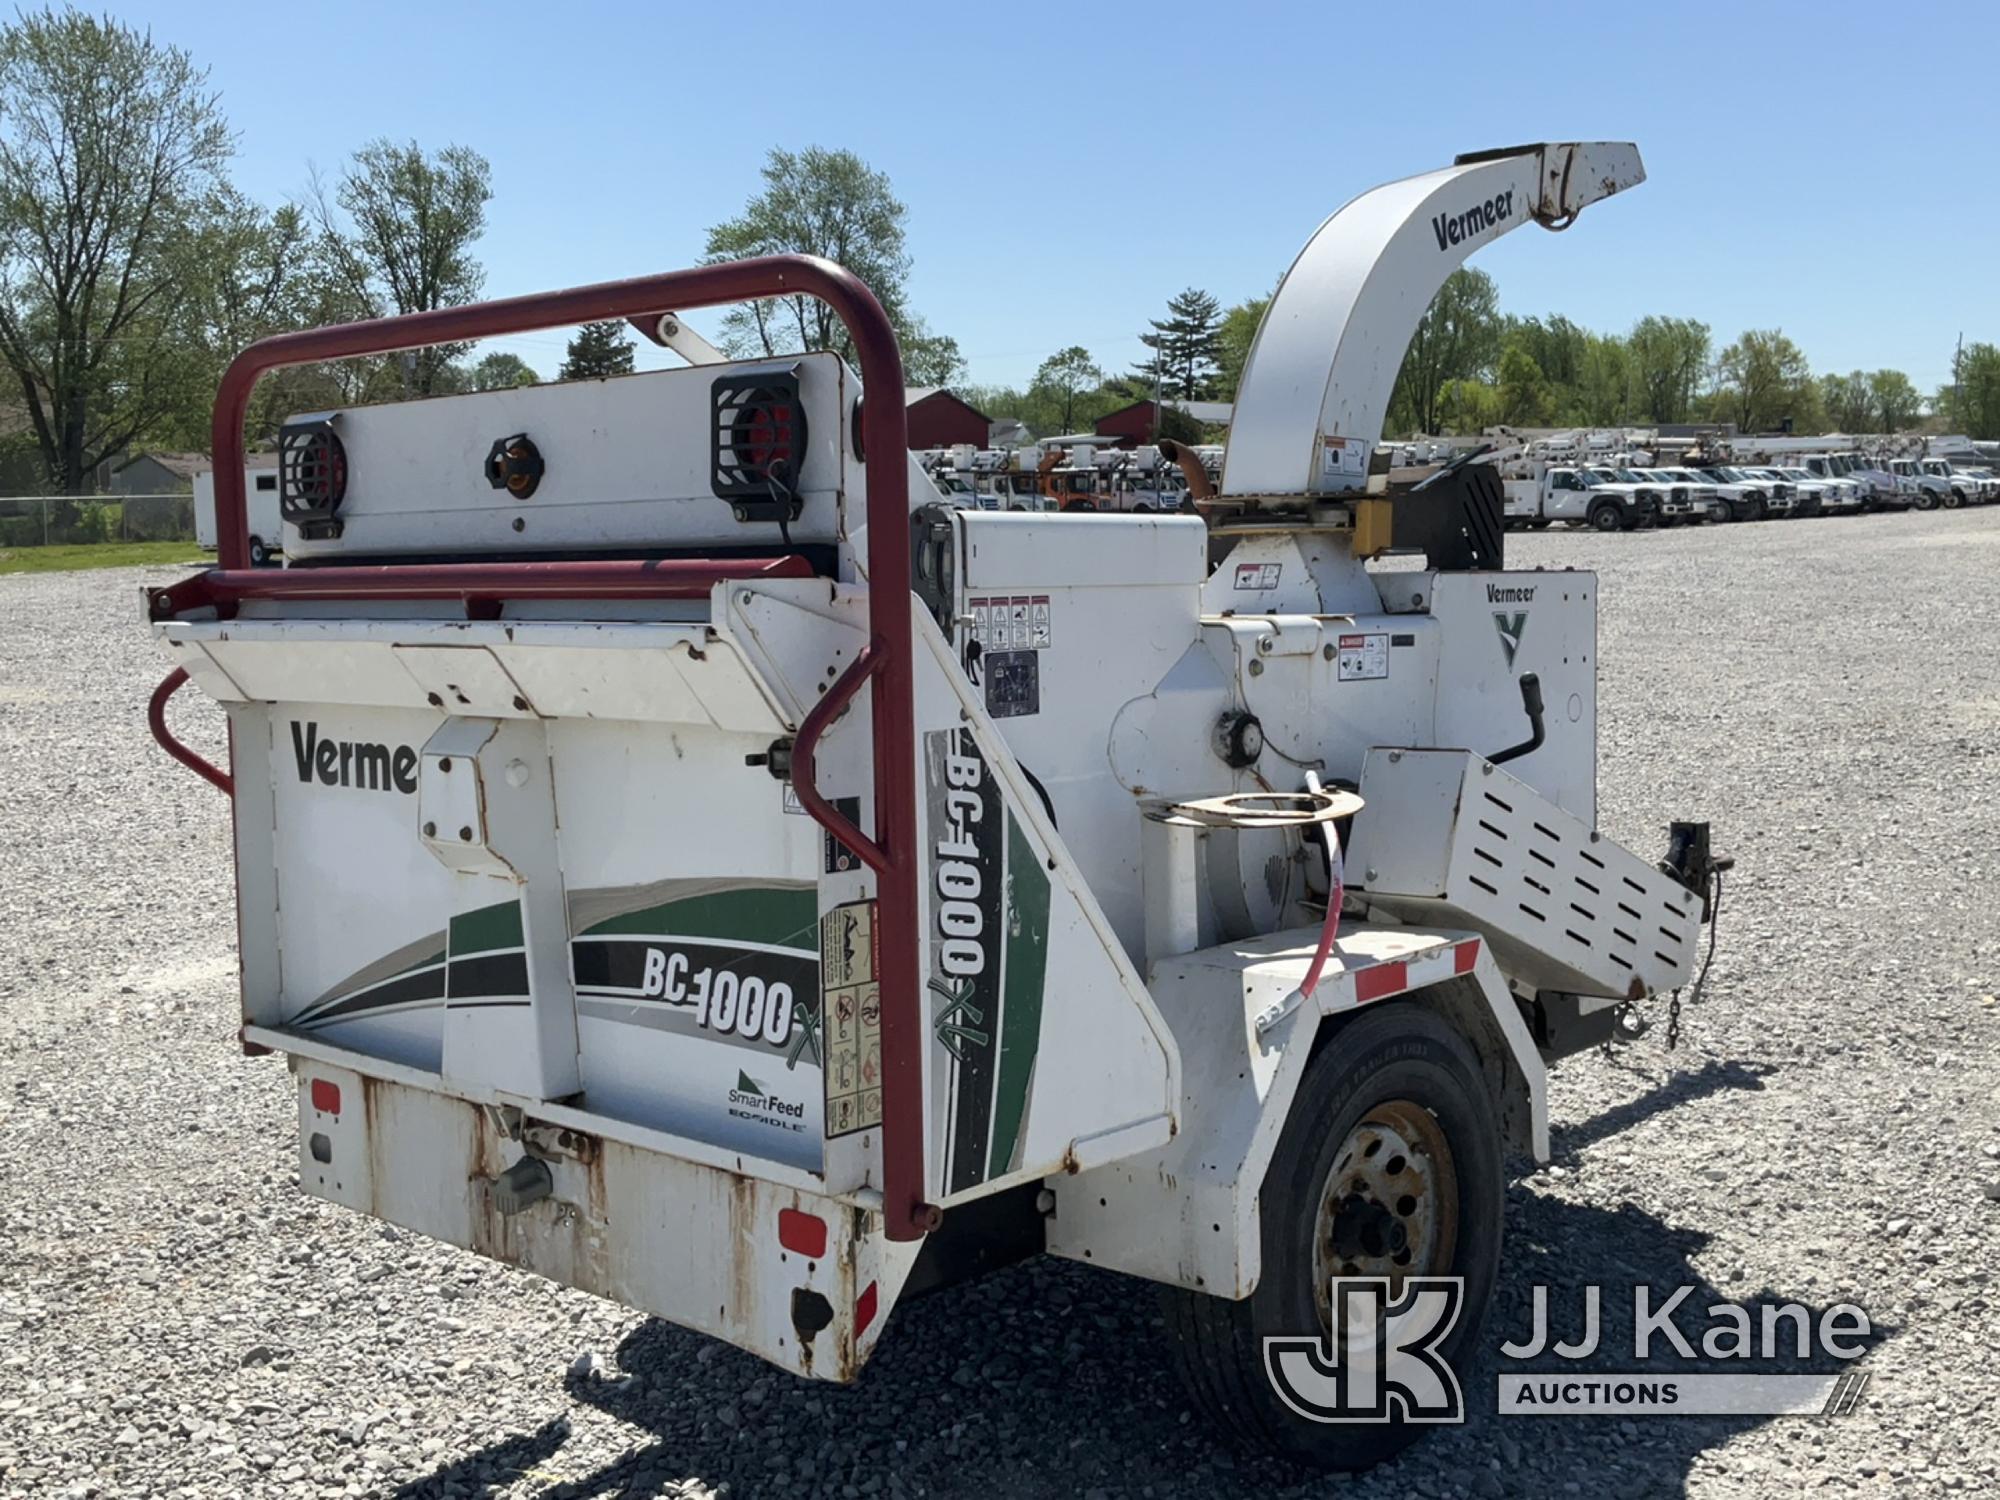 (Hawk Point, MO) 2016 Vermeer BC1000XL Chipper (12in Drum), trailer mtd Not Running, Condition Unkno